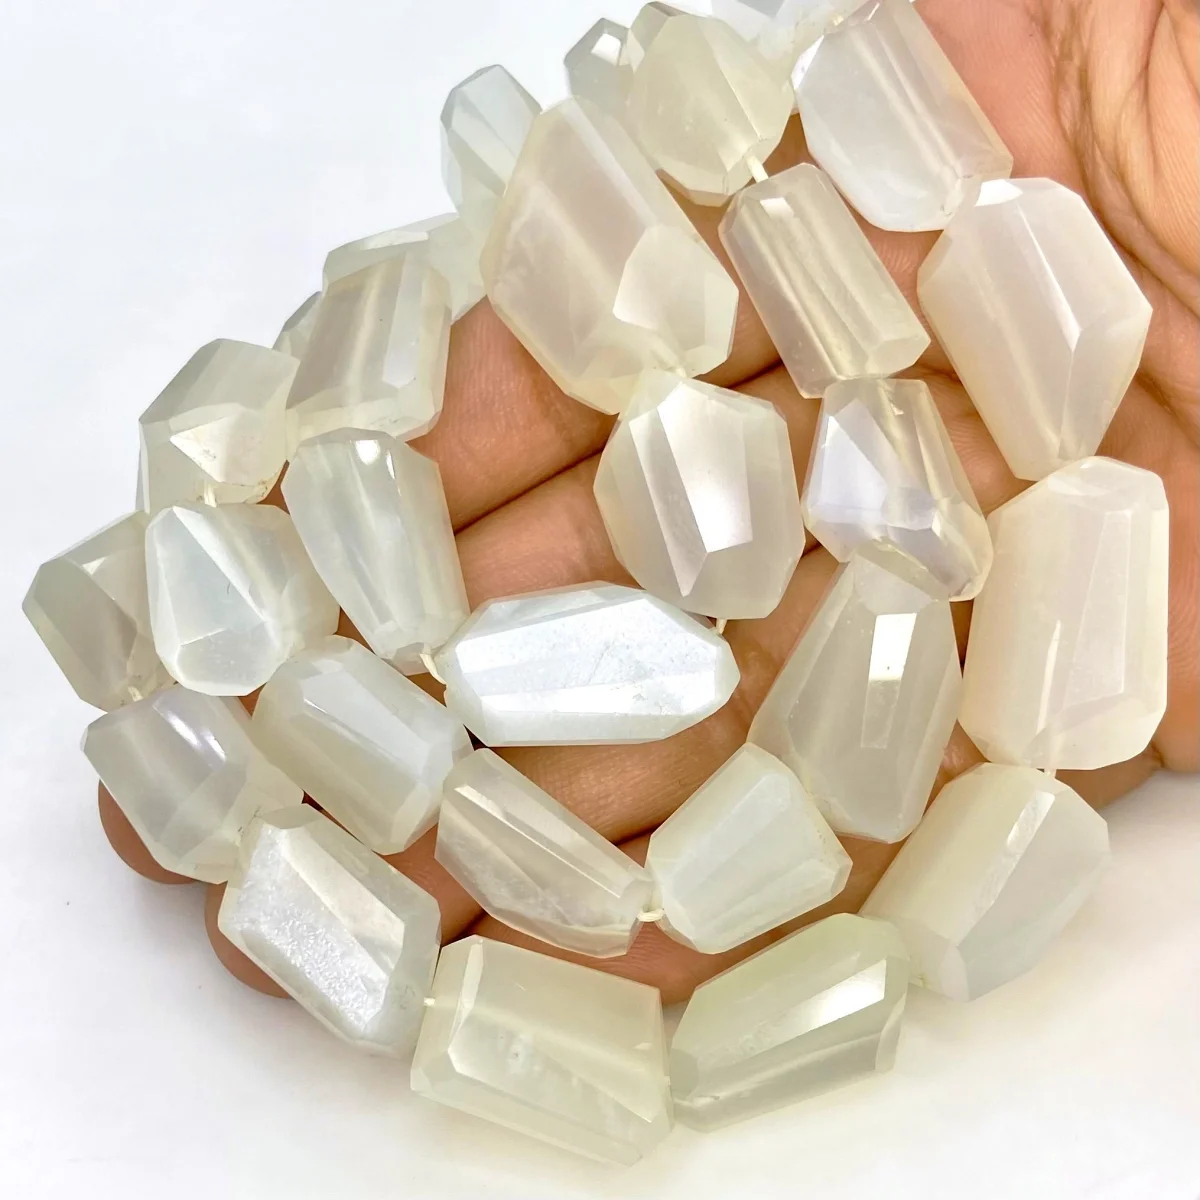 10mm Mixed Mystic Gray Moonstone Nugget Beads 